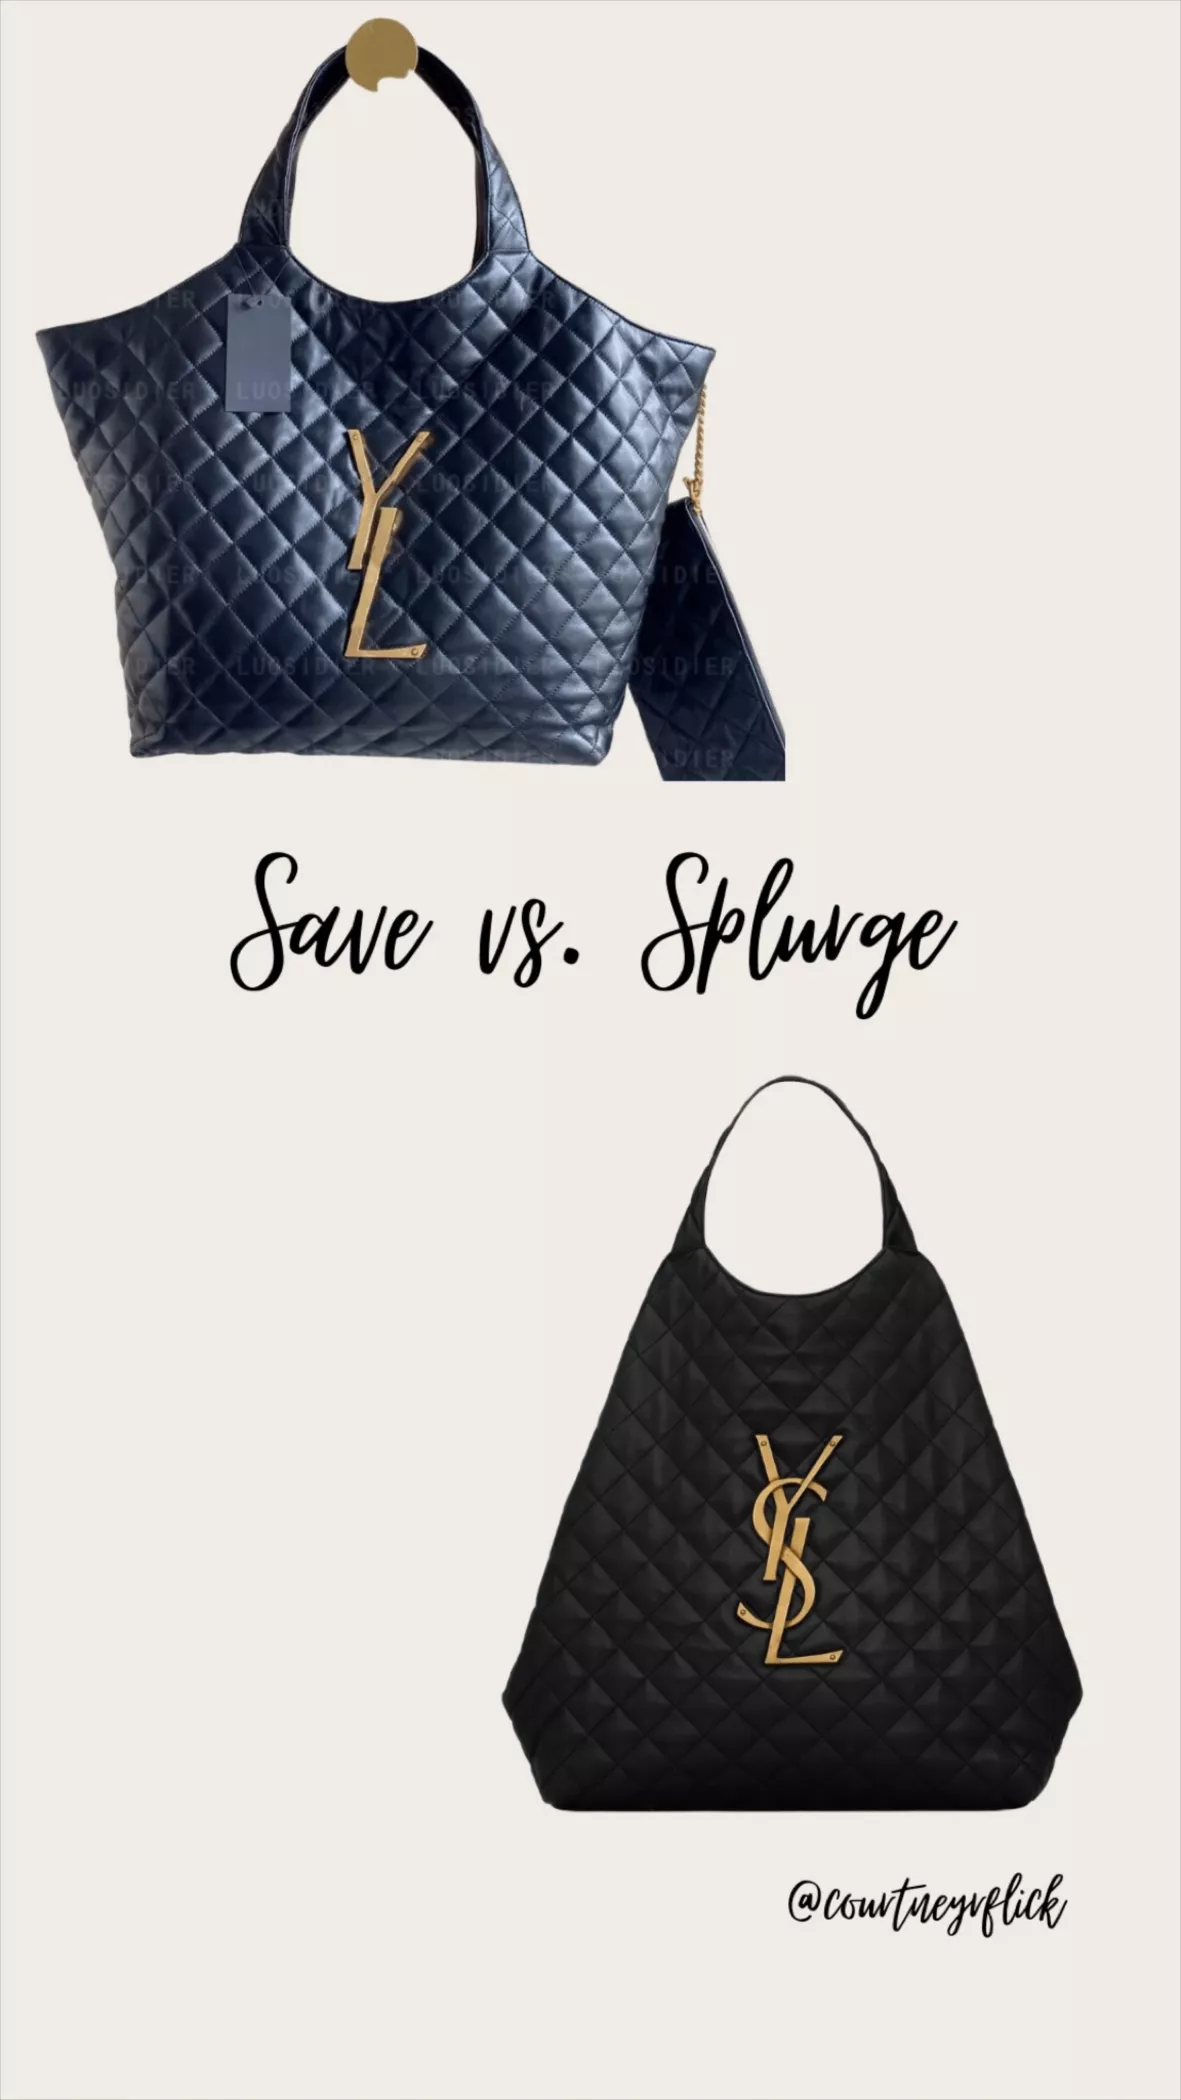 The Viral Yves Saint Laurent Tote Bag Gives You Luxury For Less